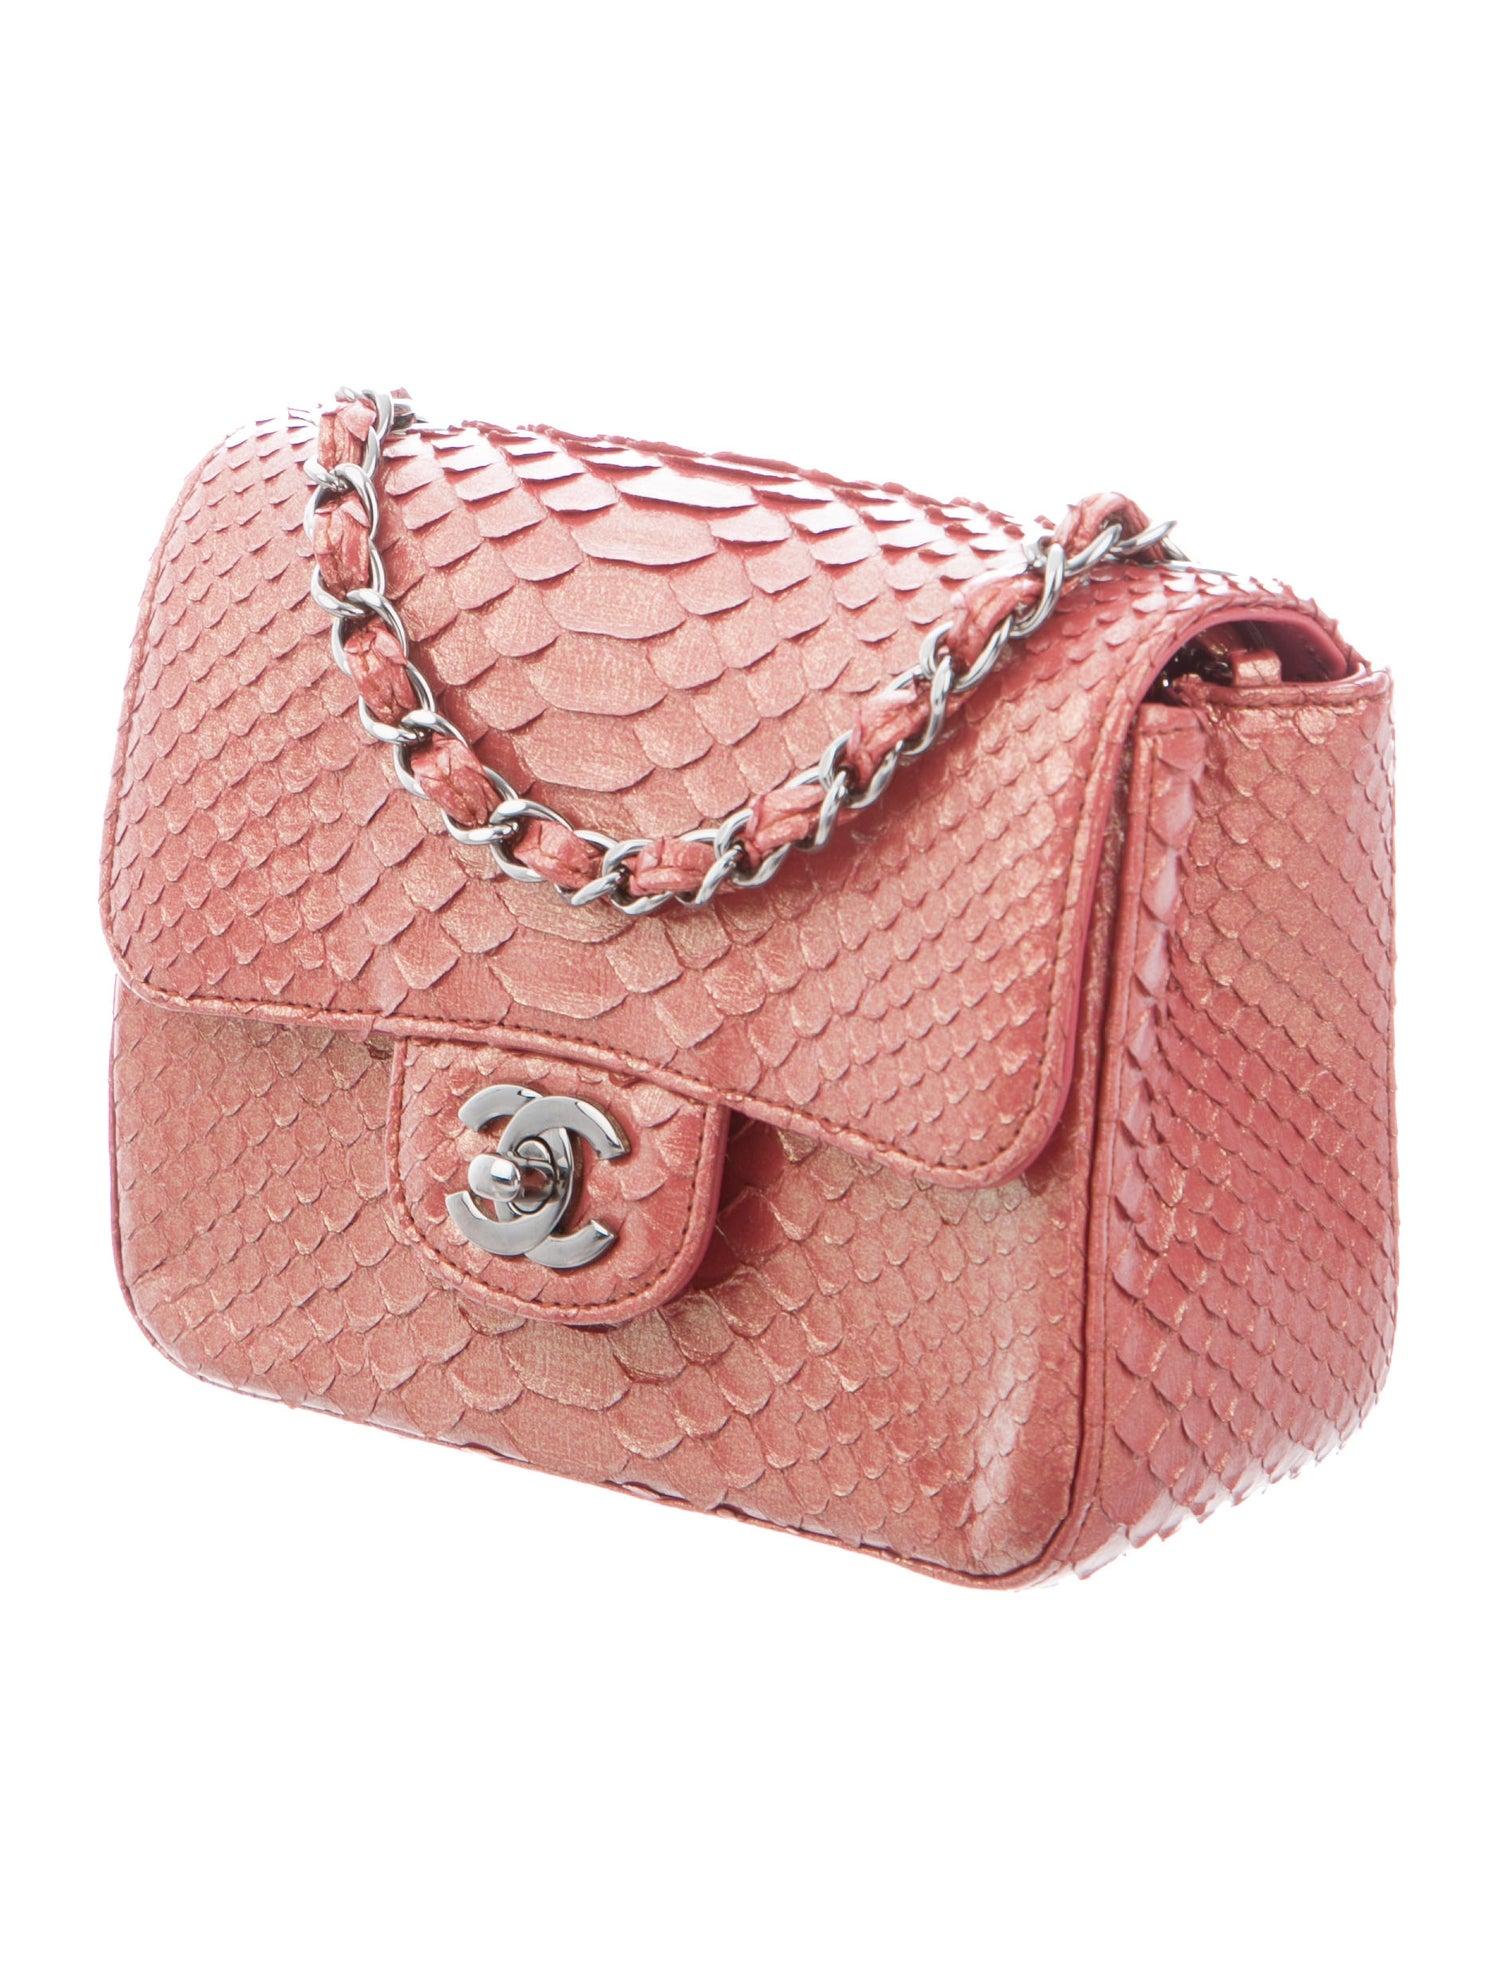 Women's Chanel NEW Pink Gold Snakeskin Leather Evening Small Shoulder Flap Bag